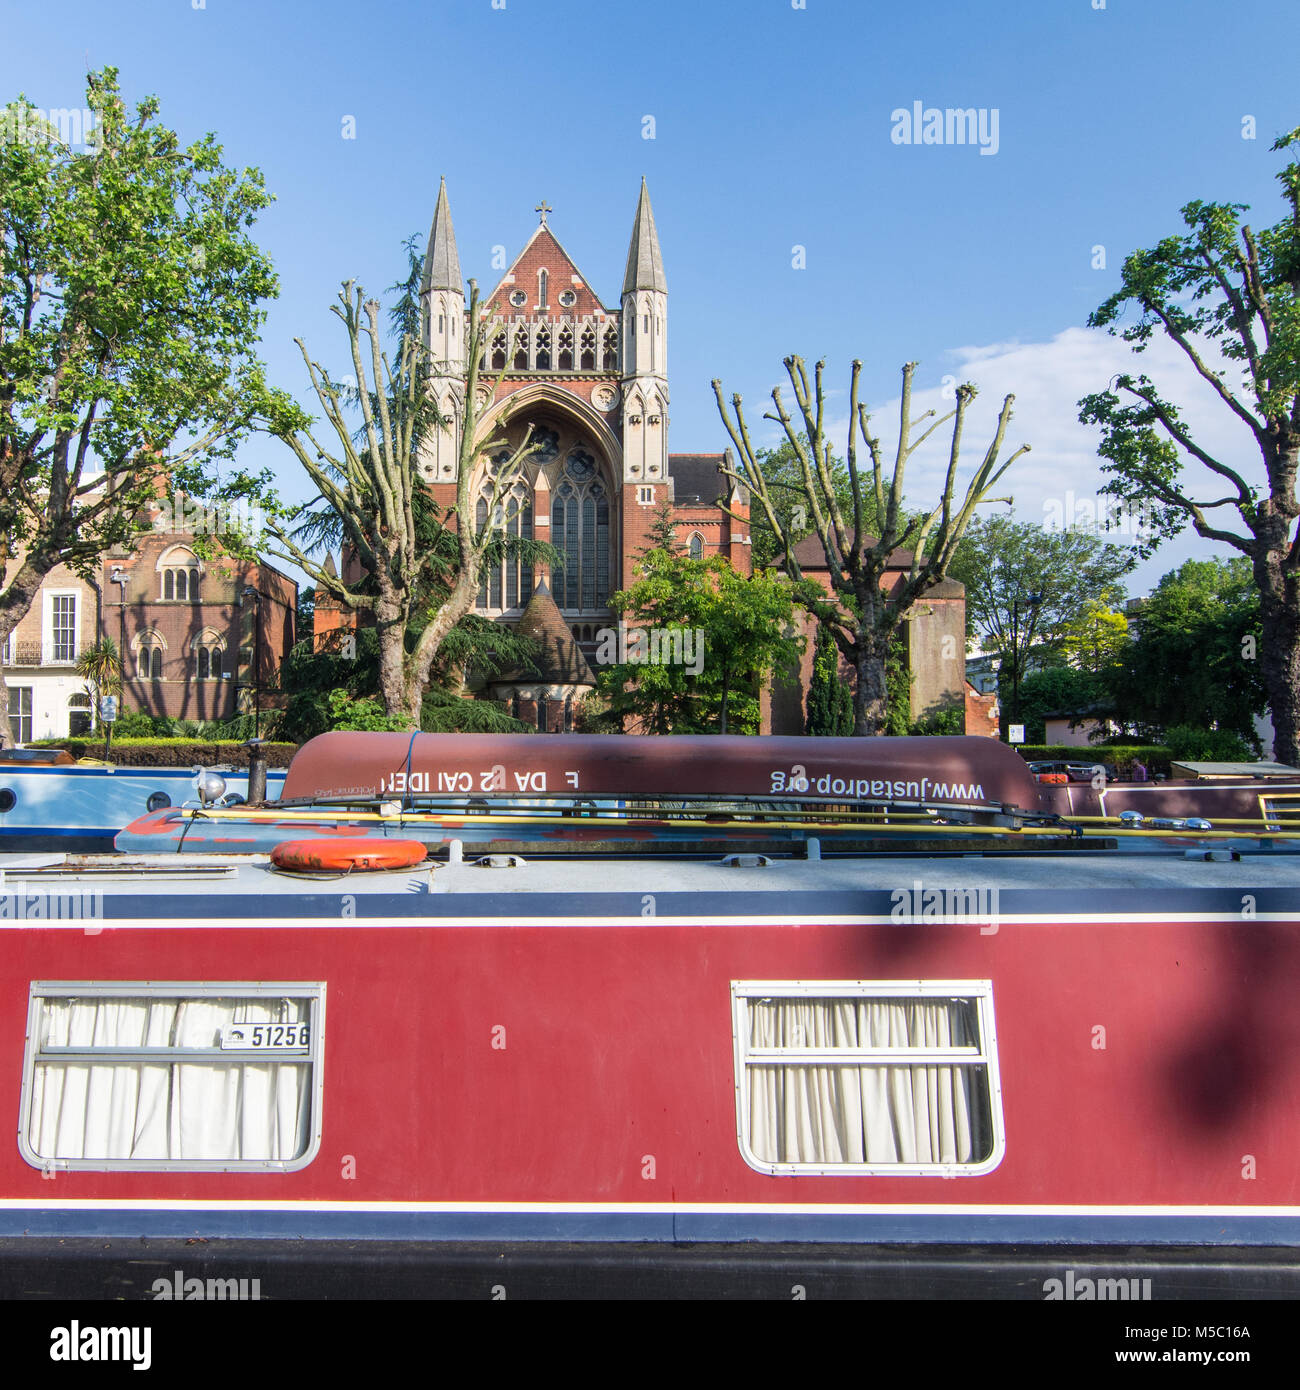 London, England - June 8, 2016: Traditional narrow boats moored on the Regent's Canal near Little Venice in the Maida Vale neighbourhood of London. Stock Photo